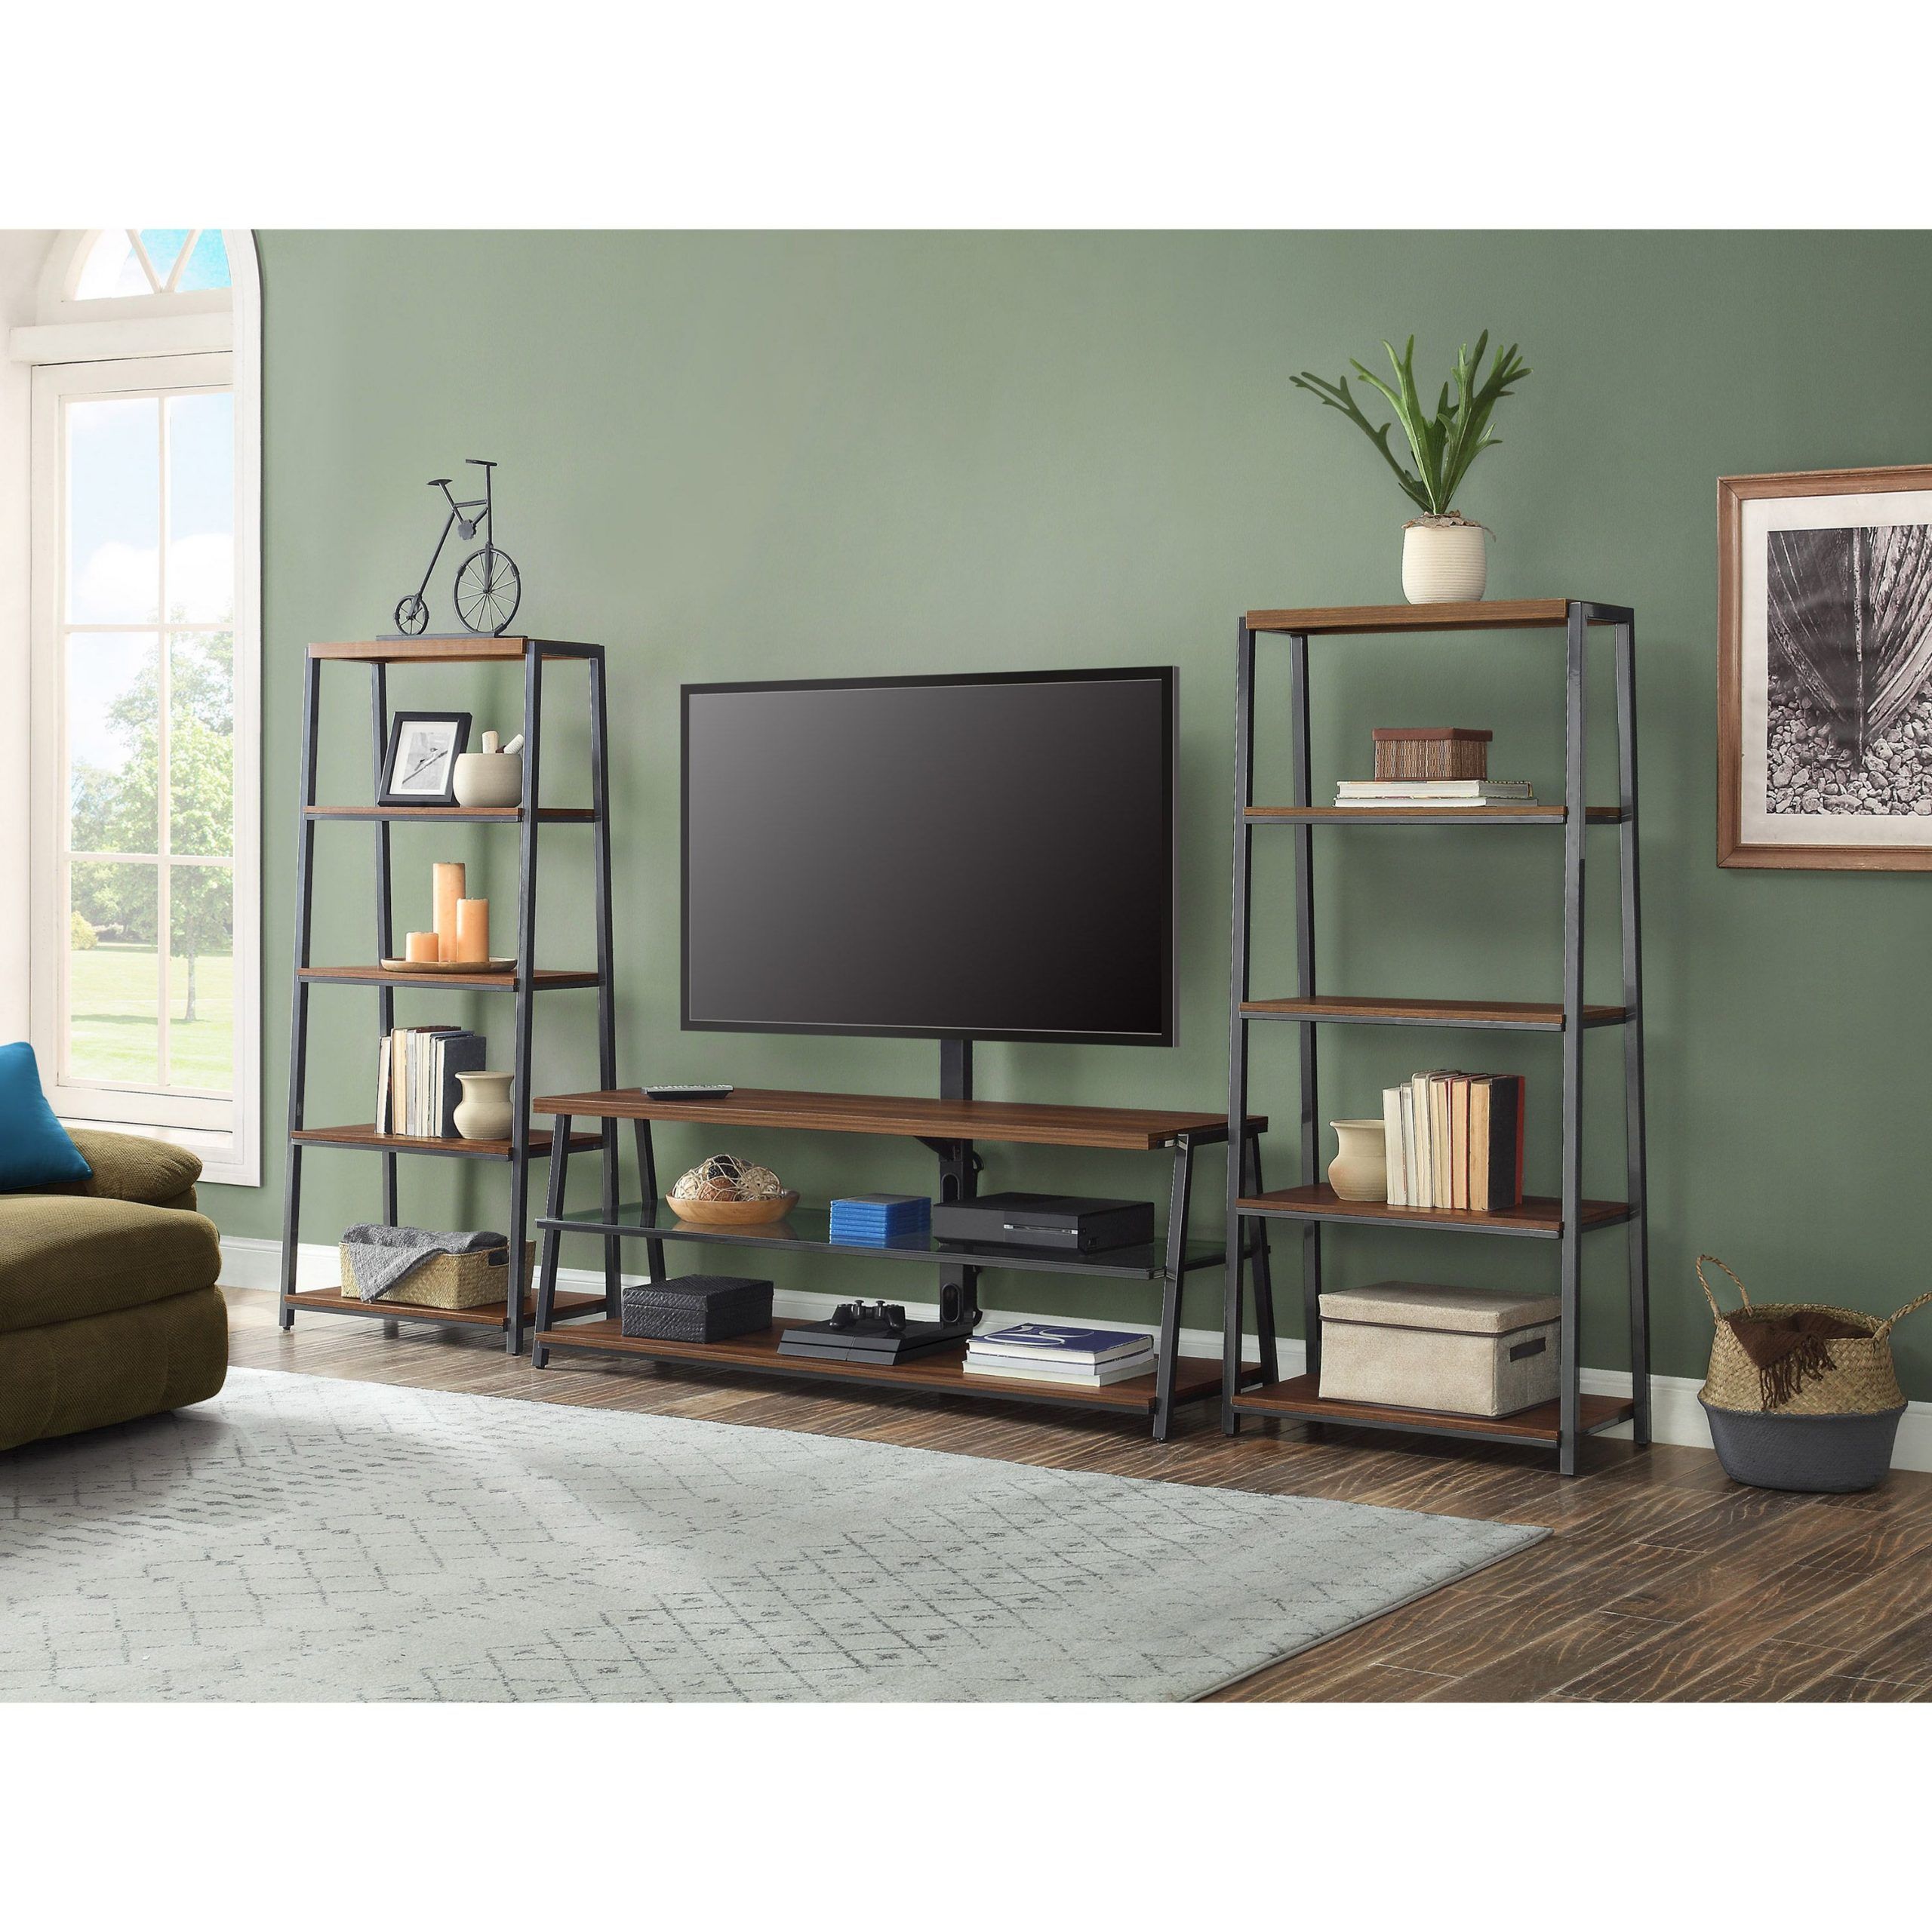 Buy Mainstays Arris 3 In 1 Tv Stand Tv Stand And (2) 4 Intended For Mainstays Arris 3 In 1 Tv Stands In Canyon Walnut Finish (View 9 of 20)